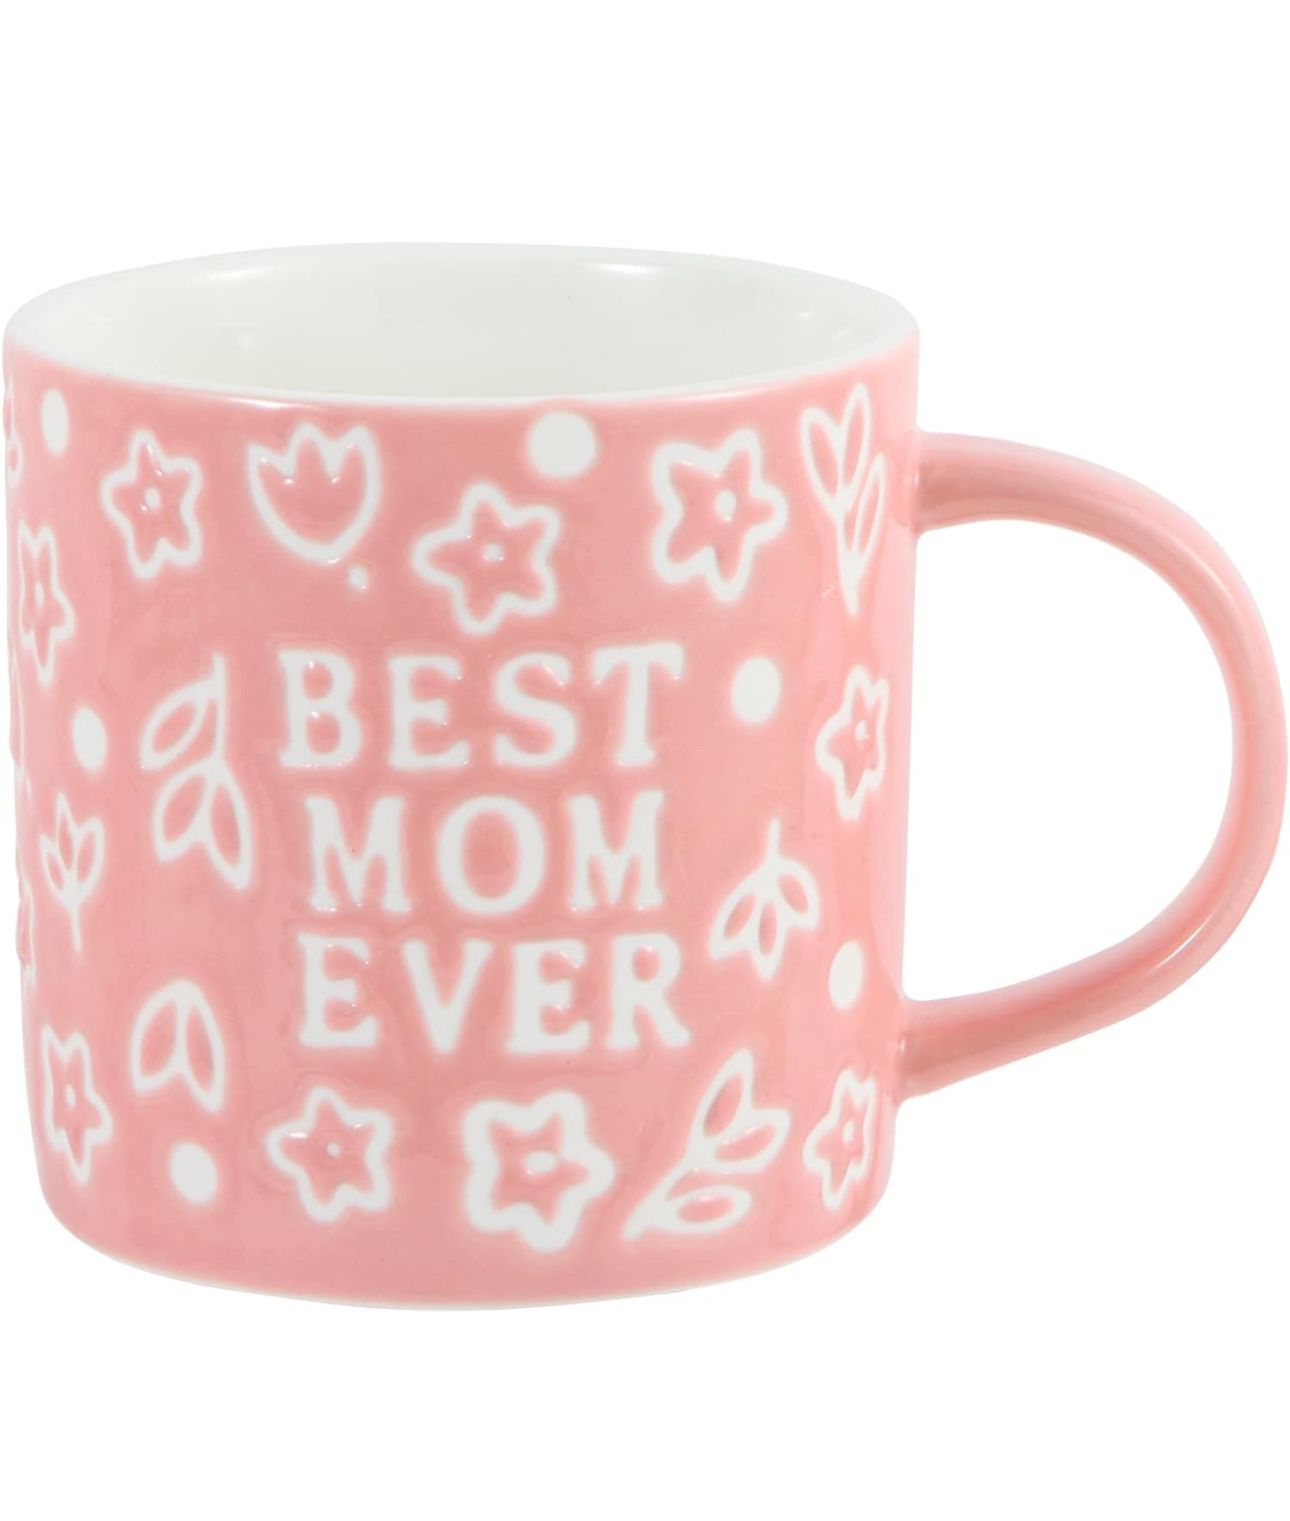 Gifts for Mom - Mothers Day Birthday Gifts for Mom - Best Mom Mug Gifts for Mom - Best Mom Ever Floral Embossed Pattern Ceramic Coffee Mug